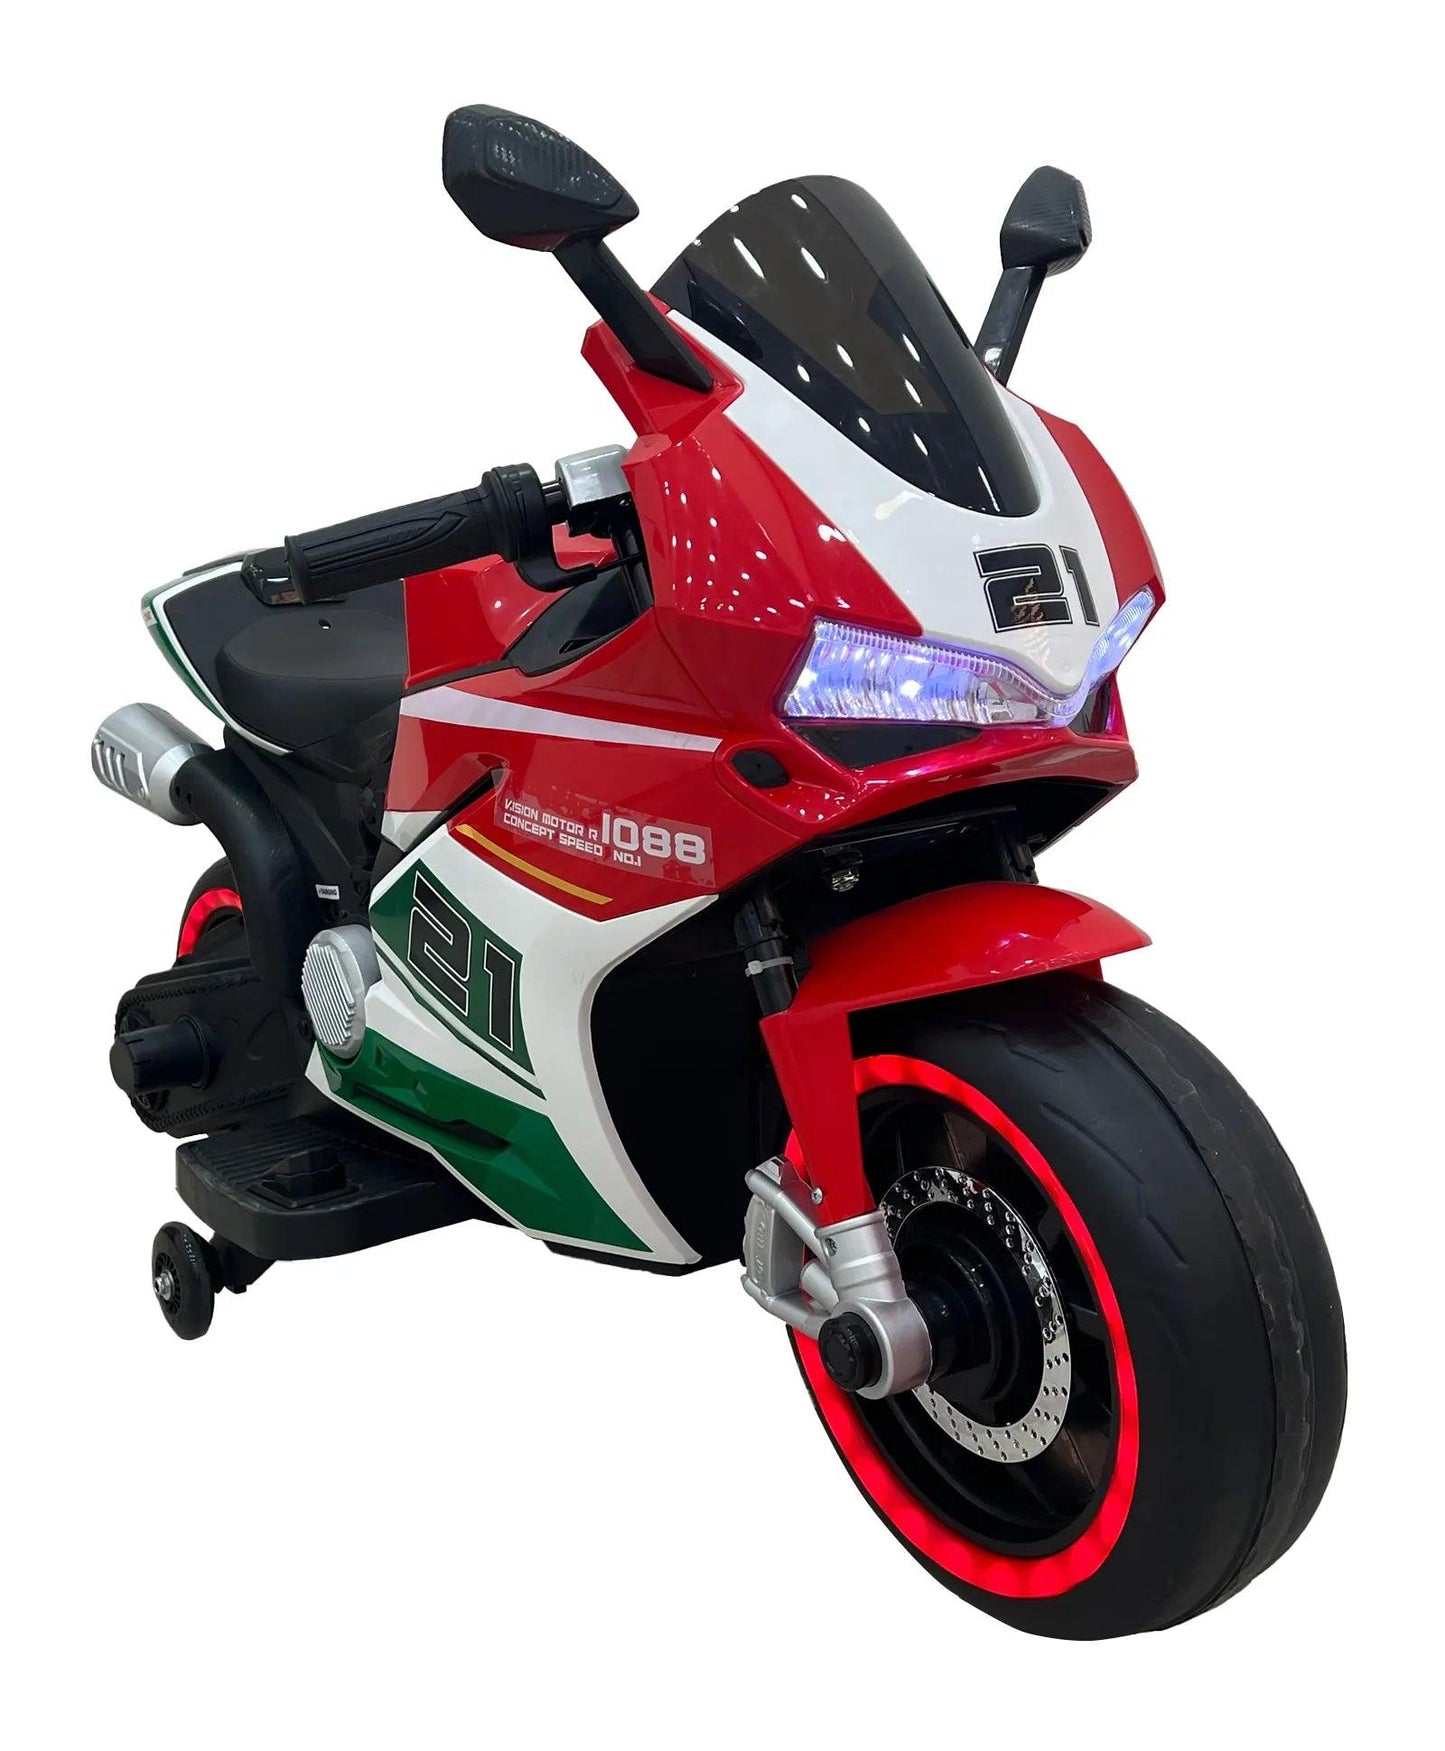 PATOYS | Stylish and Sturdy Battery Operated Ride On Bike - Red - PATOYS